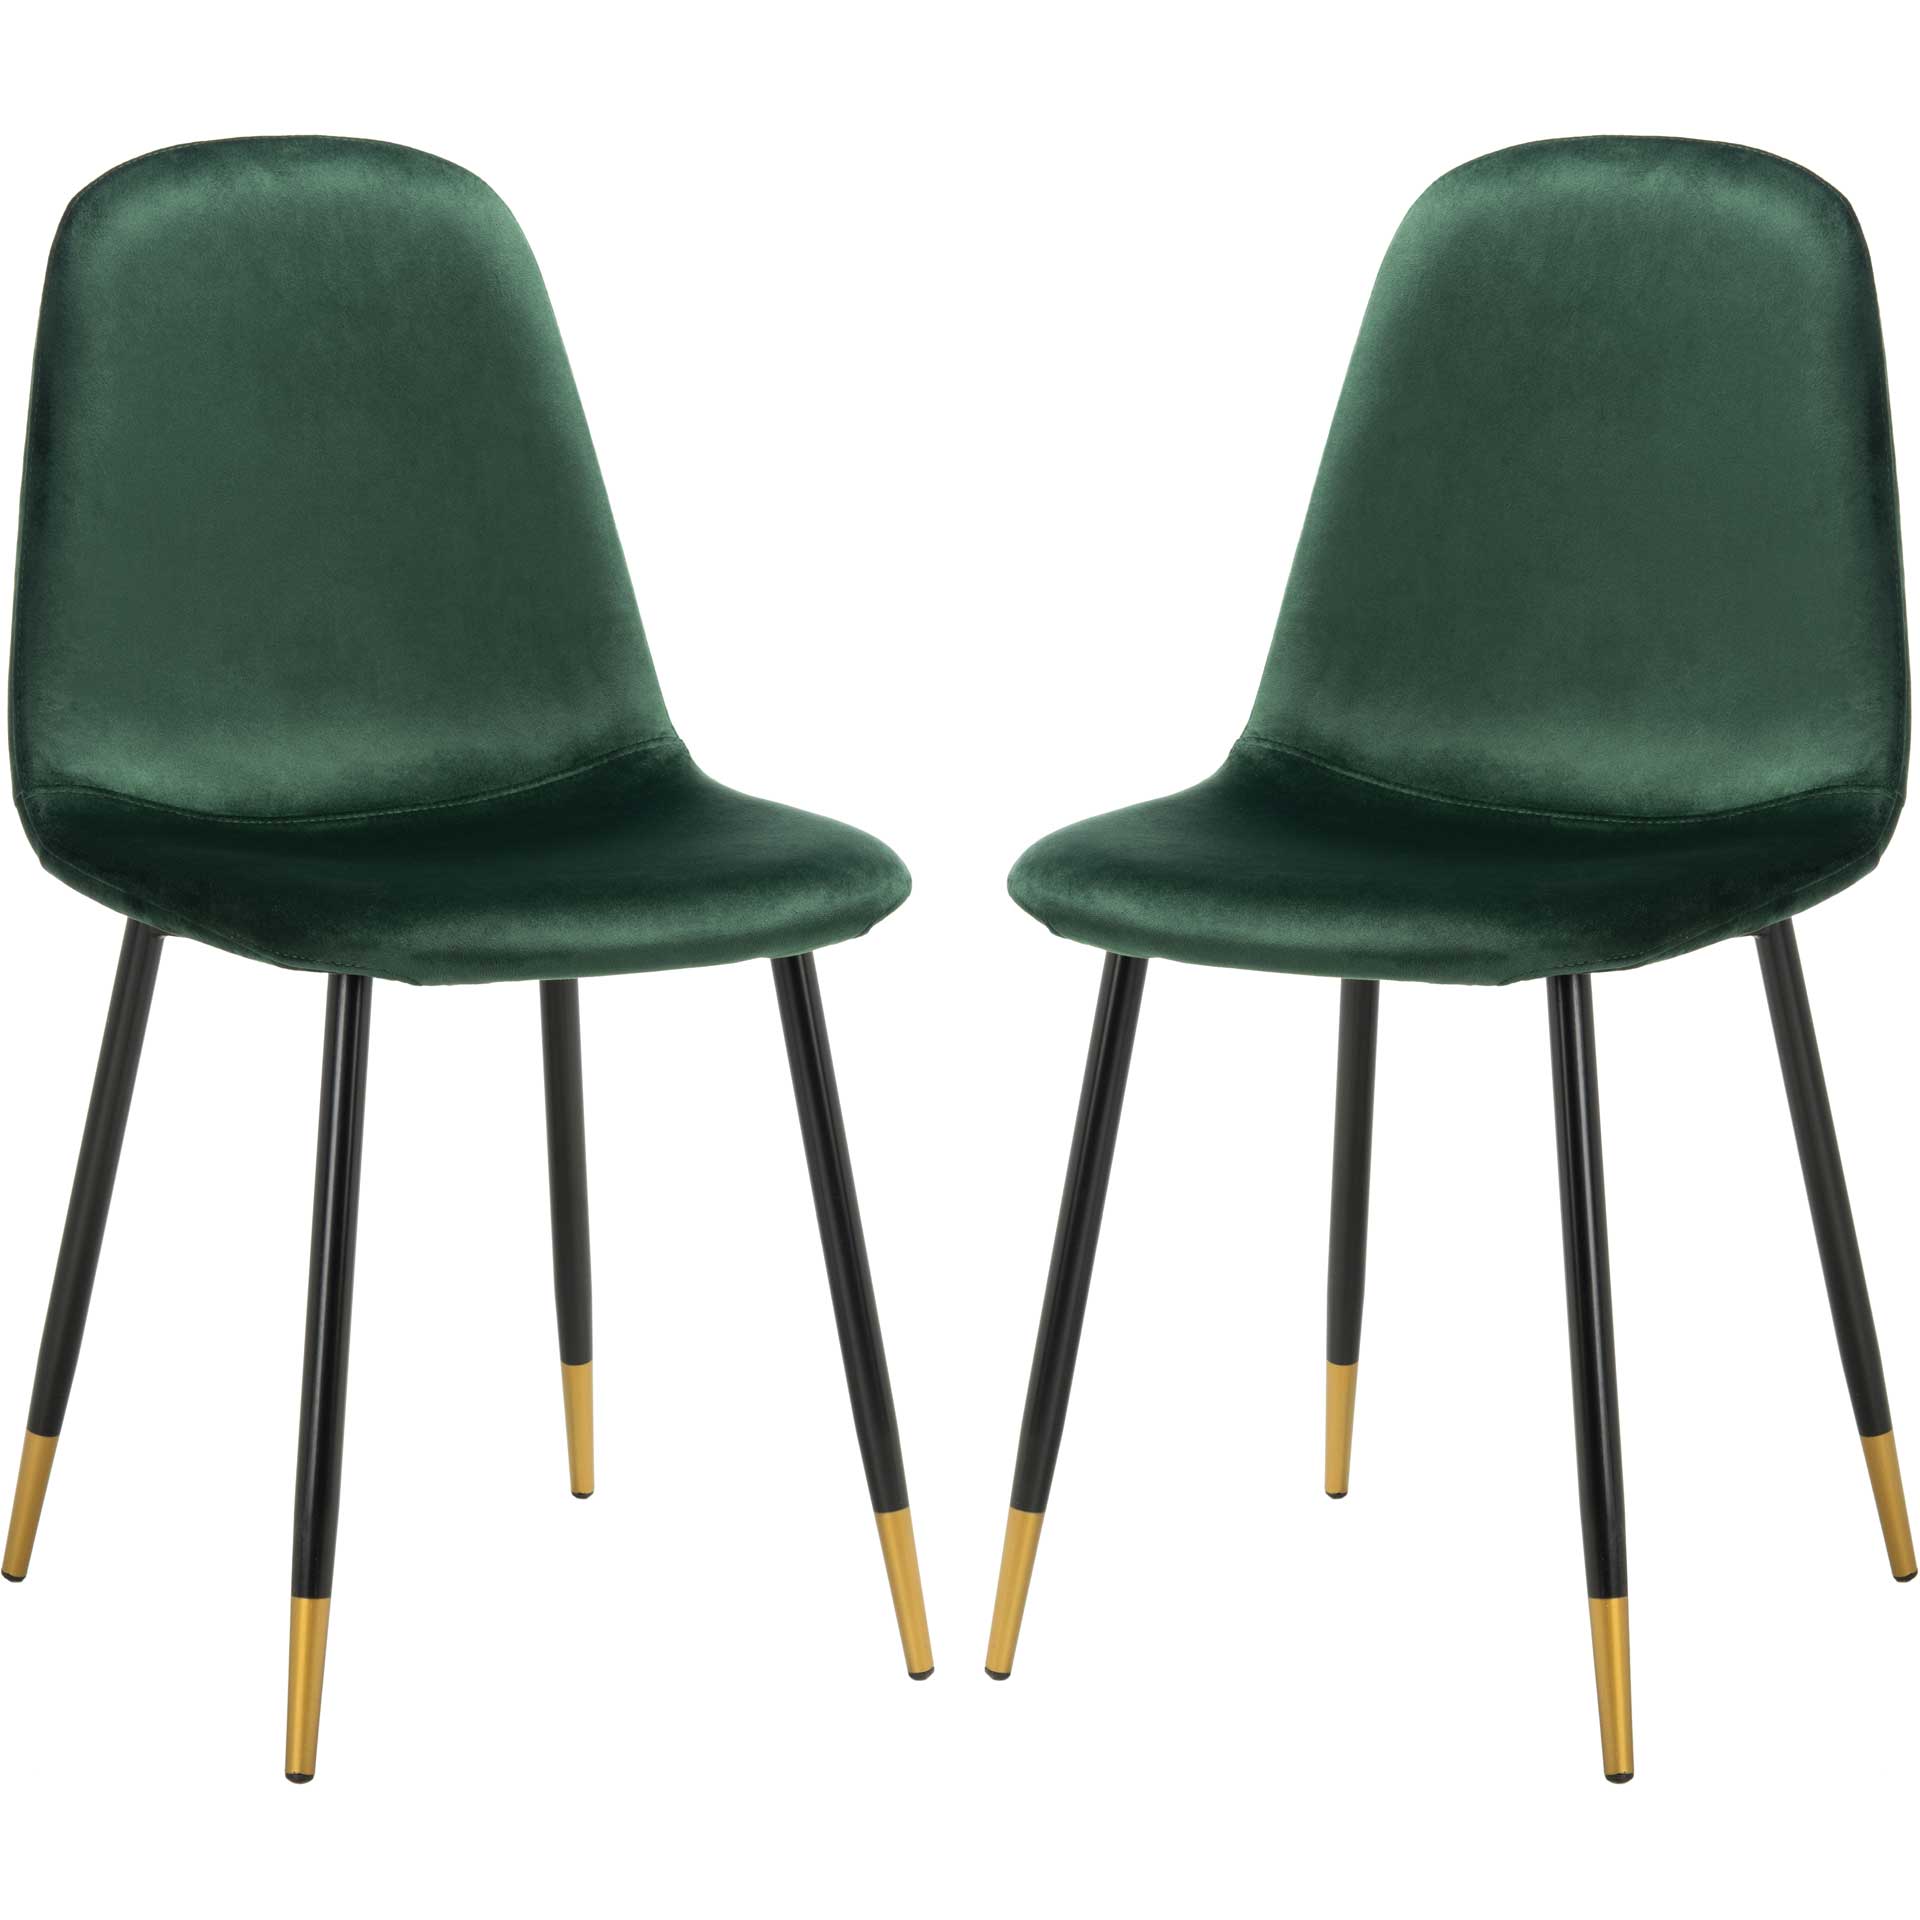 Blaize Dining Chair Green/Black (Set of 2)